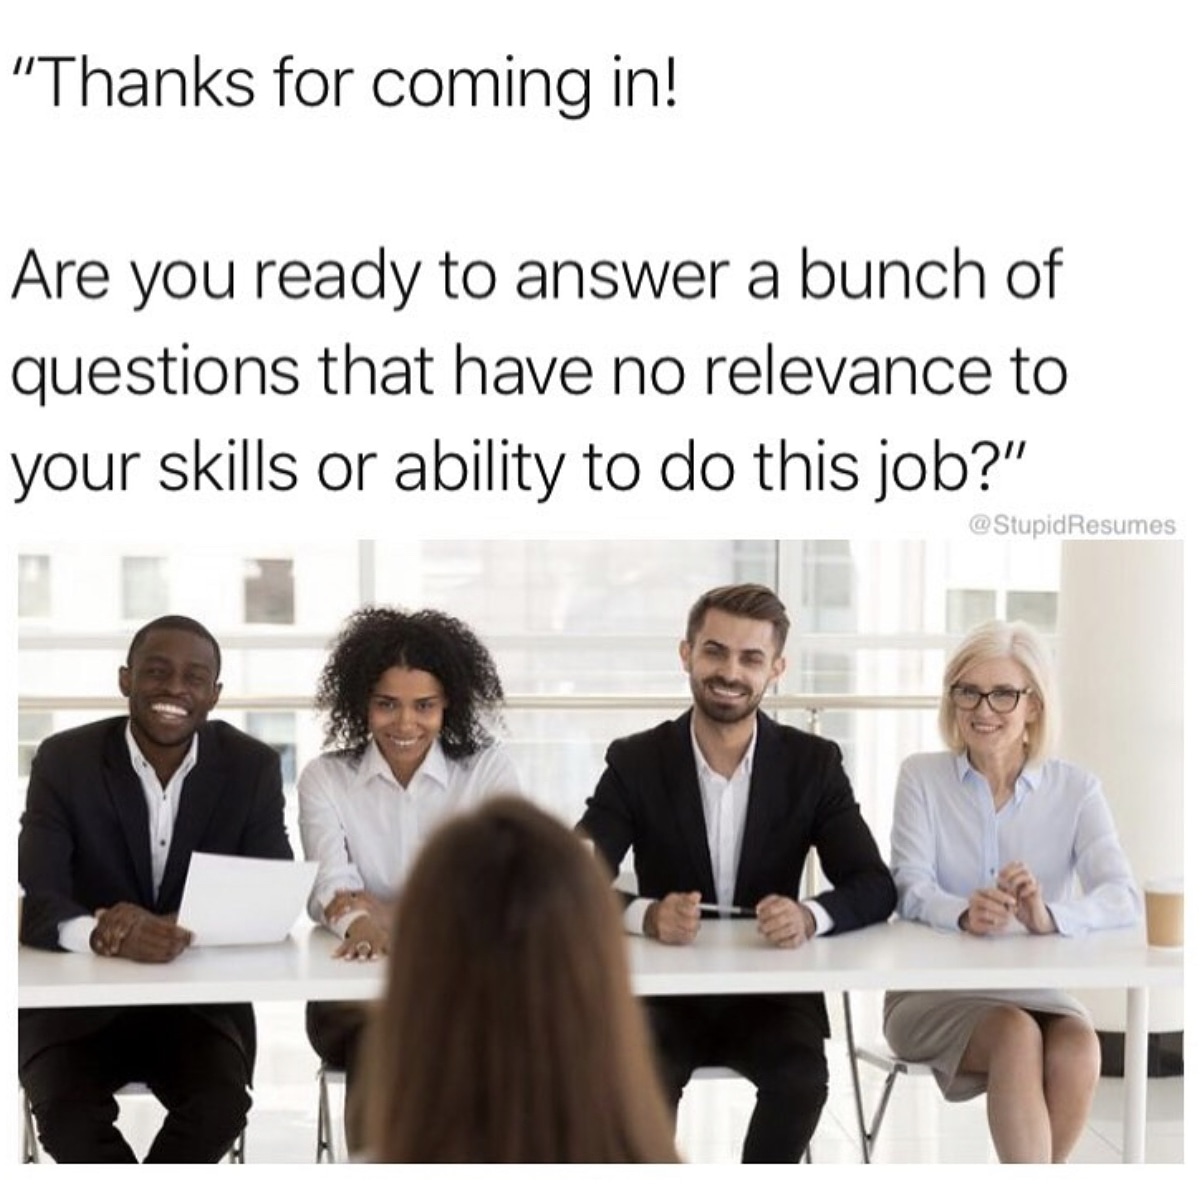 job interview - "Thanks for coming in! Are you ready to answer a bunch of questions that have no relevance to your skills or ability to do this job?" Resumes